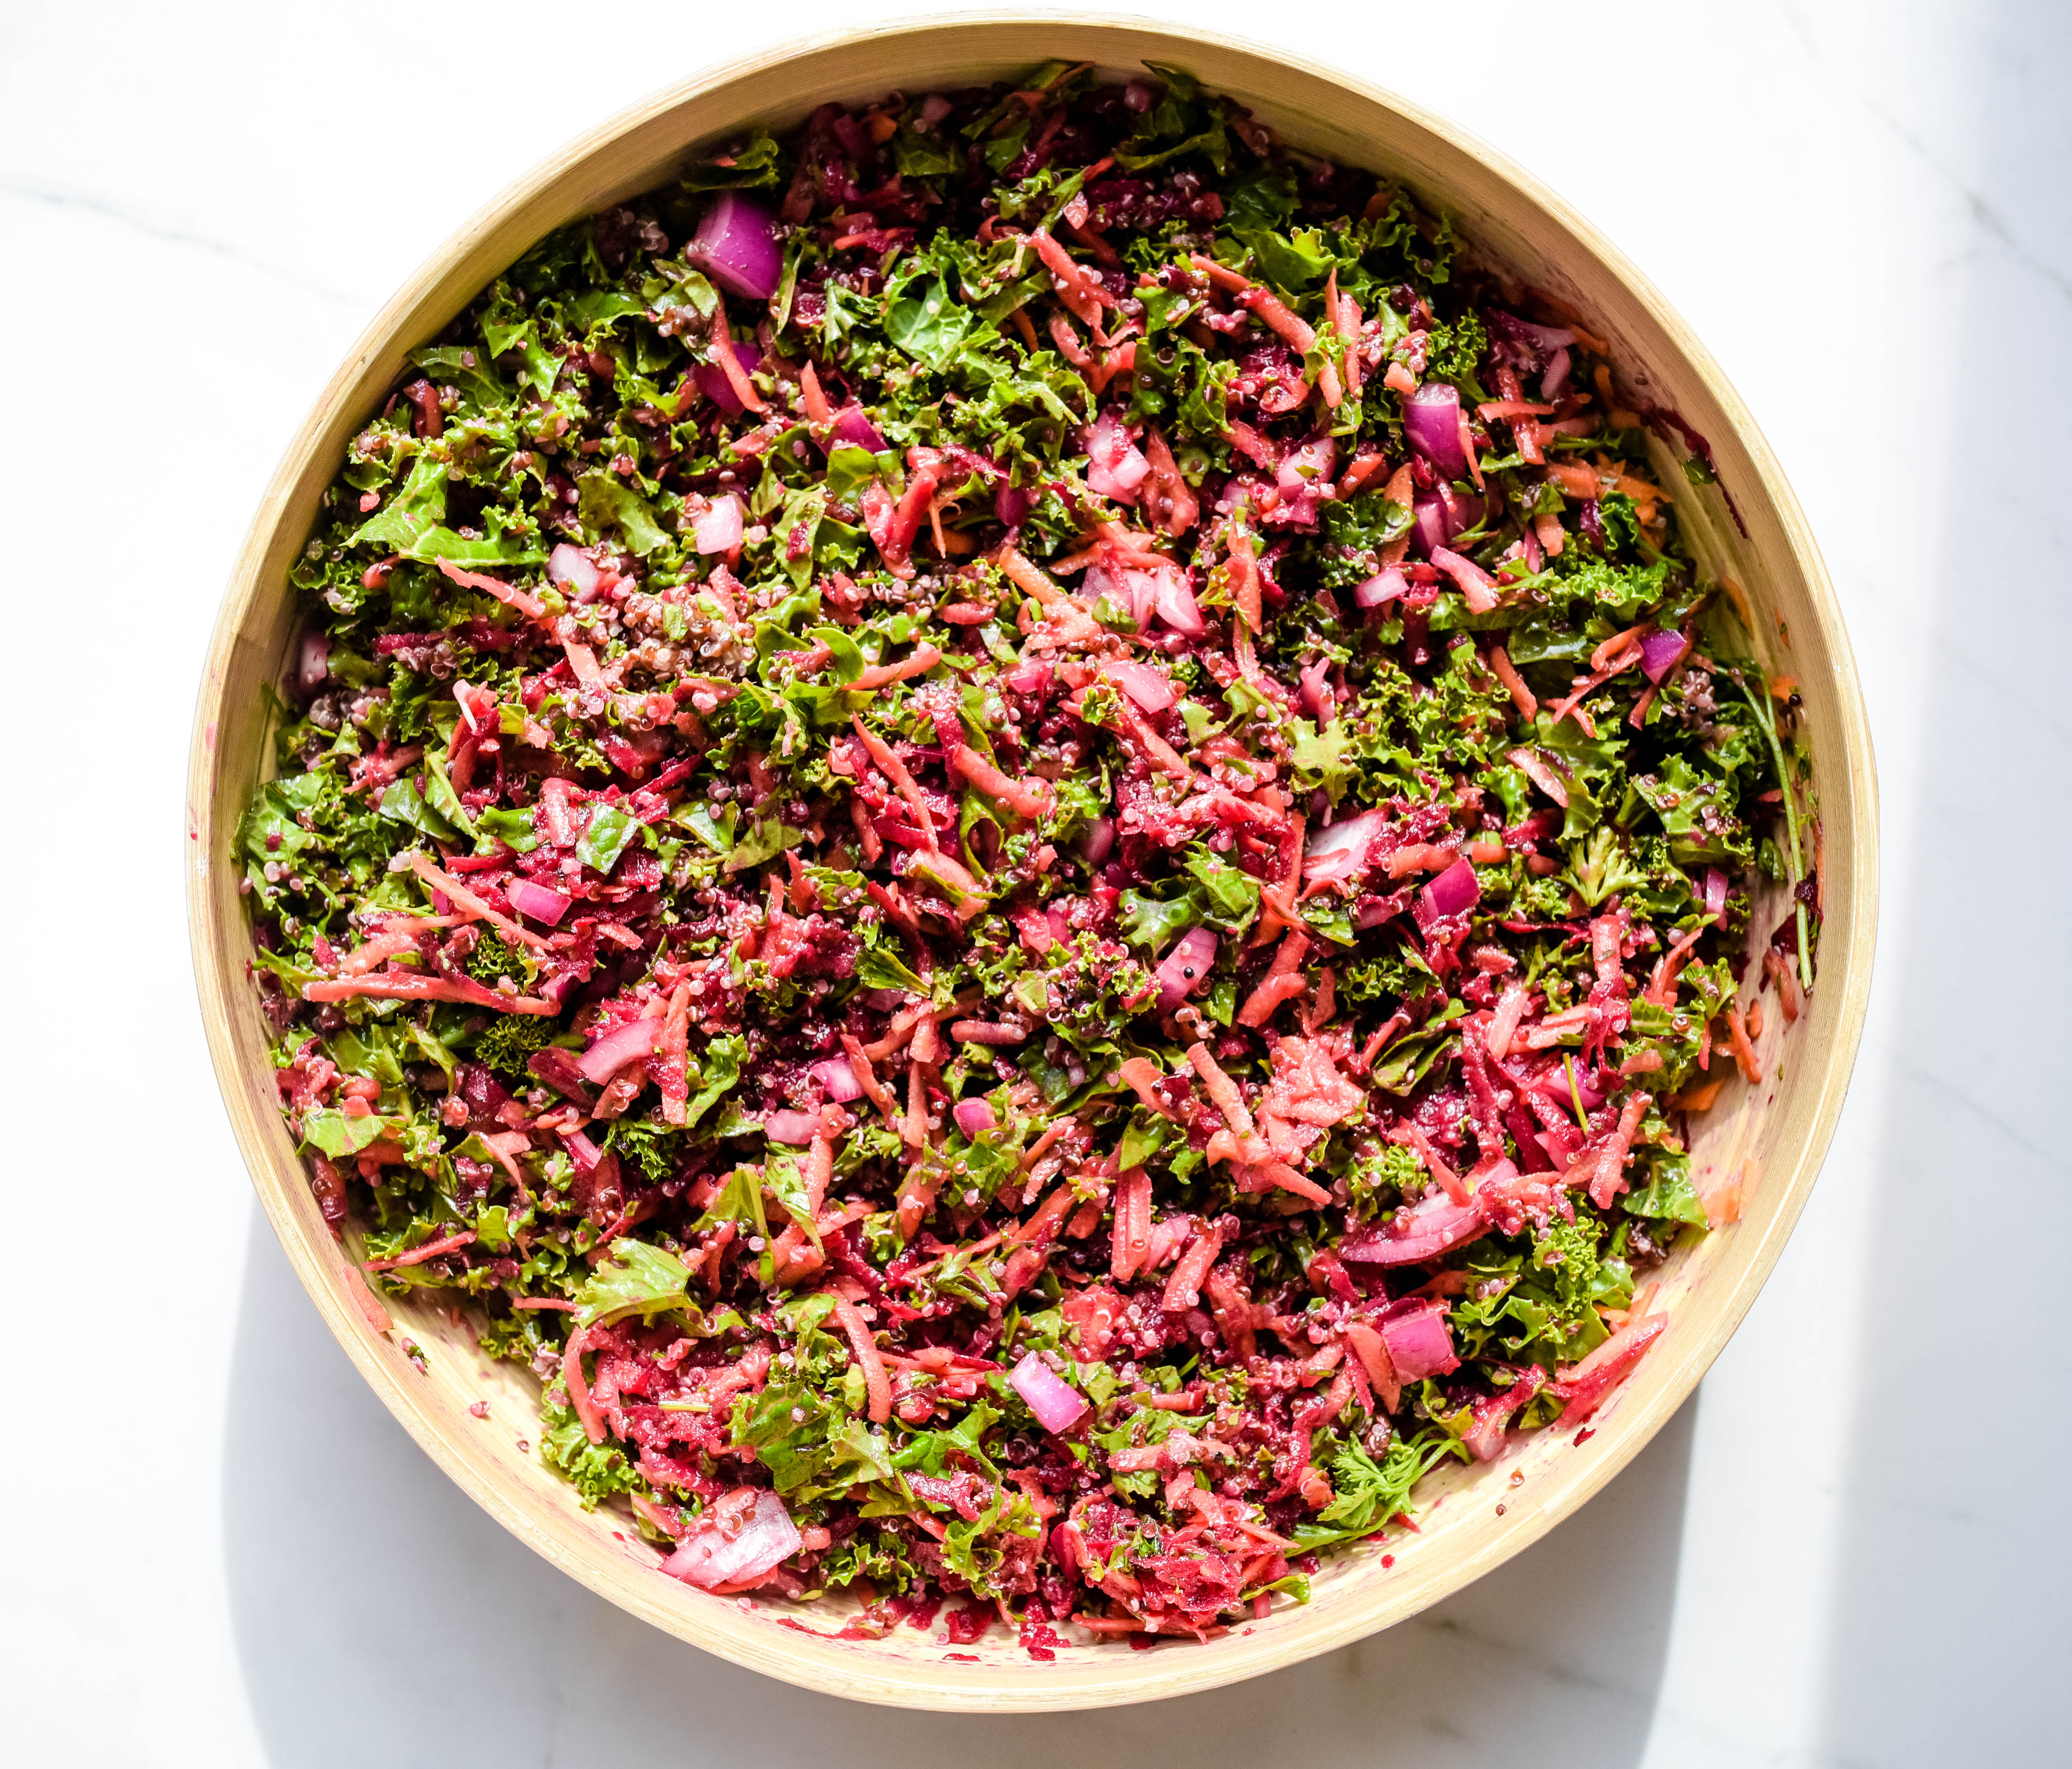 SHREDDED BEET, CARROT AND KALE SALAD